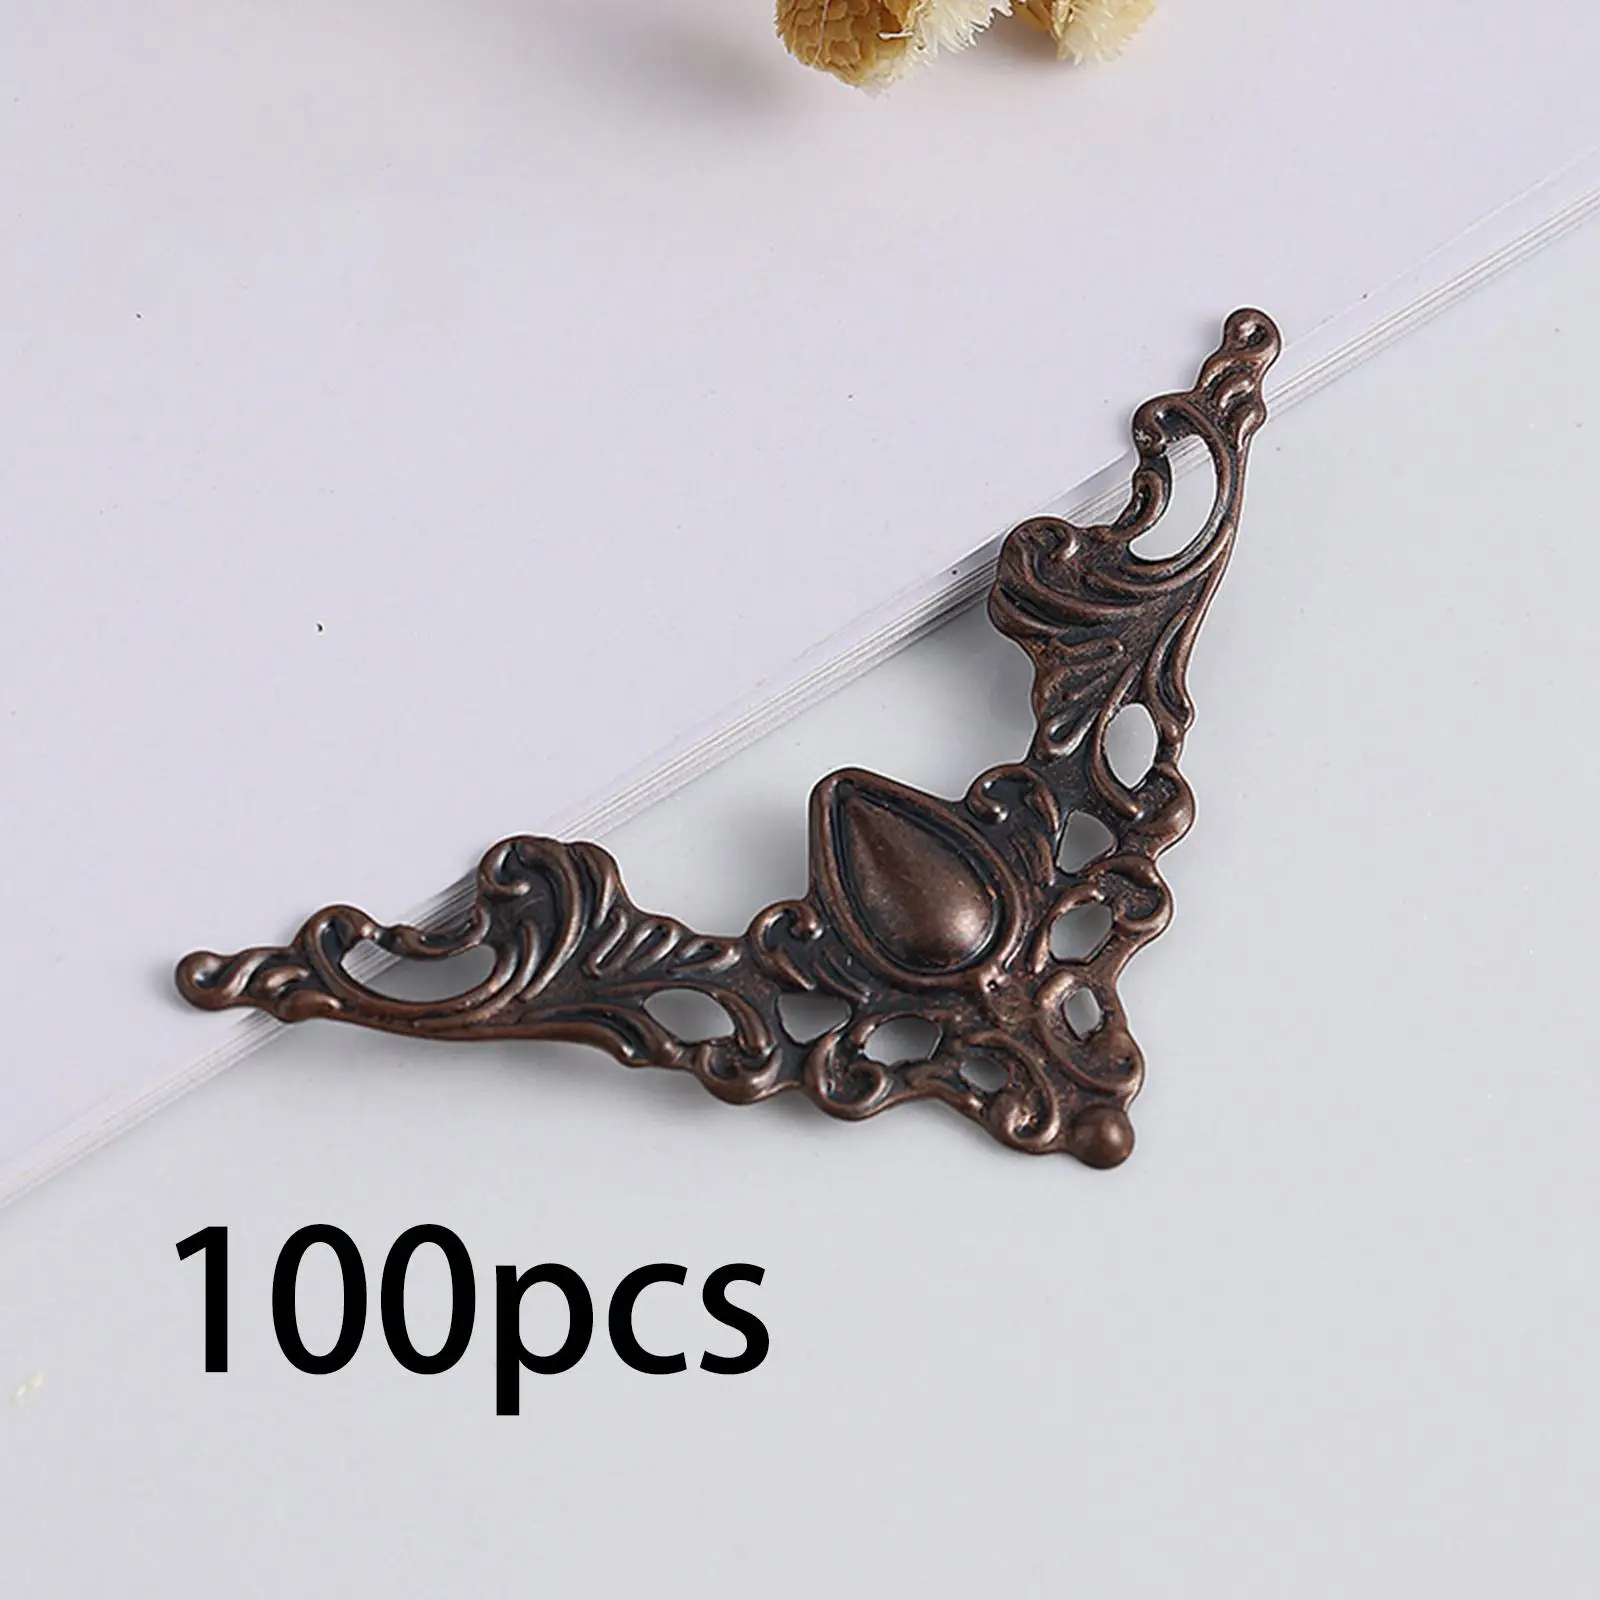 100Pcs Antique Style Corner Brackets Carved Decal Small Metal Corner Protectors for Photo Frame Desk Jewelry Gift Box Decorative